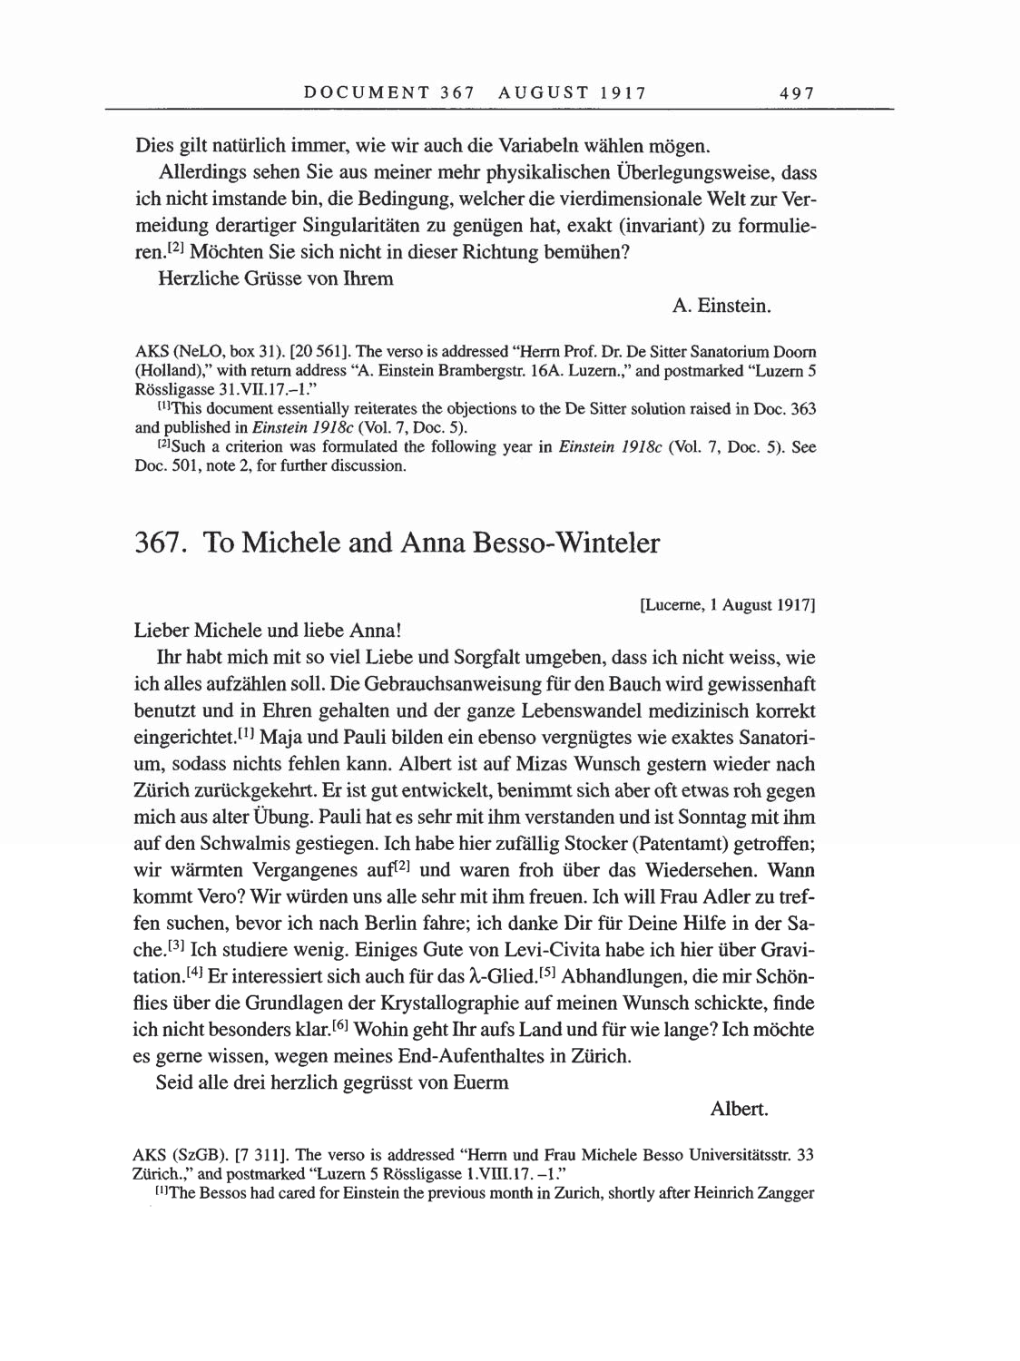 Volume 8, Part A: The Berlin Years: Correspondence 1914-1917 page 497